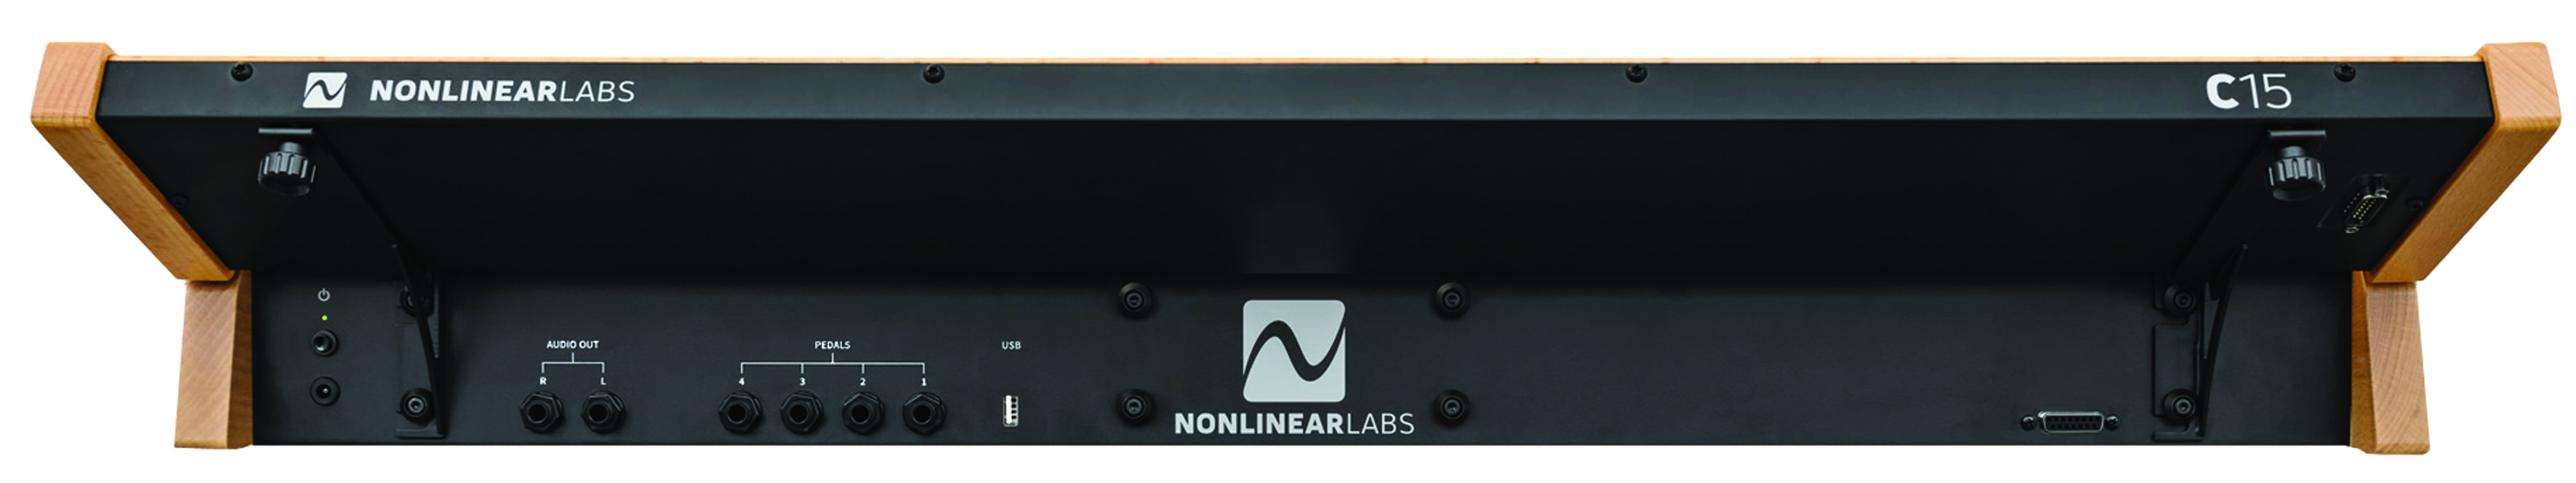 Nonlinear Labs